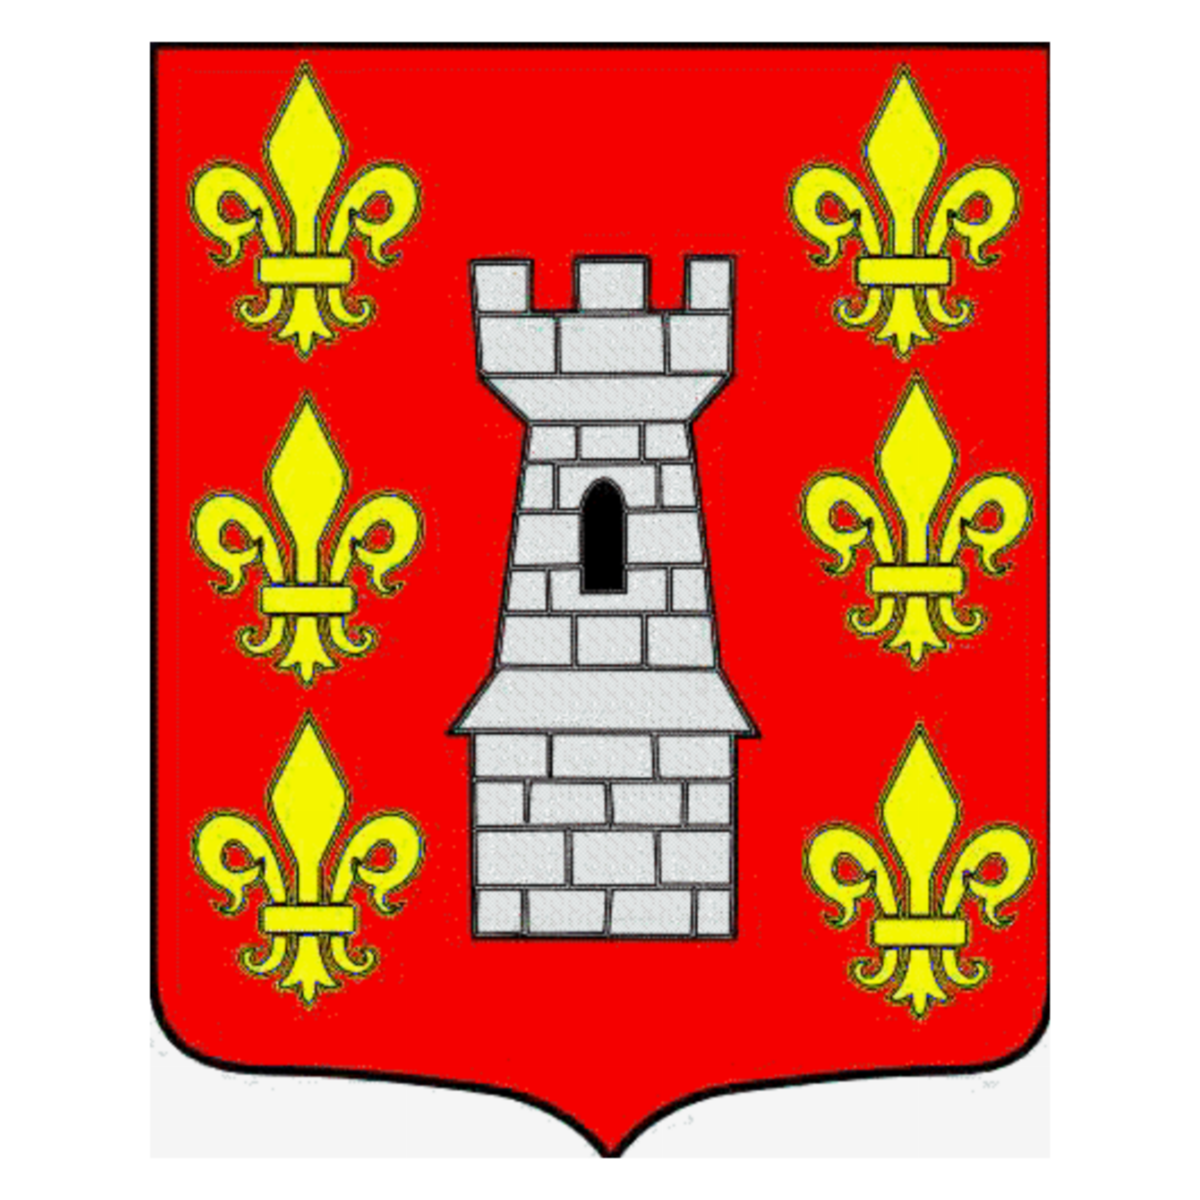 Coat of arms of family Allegri